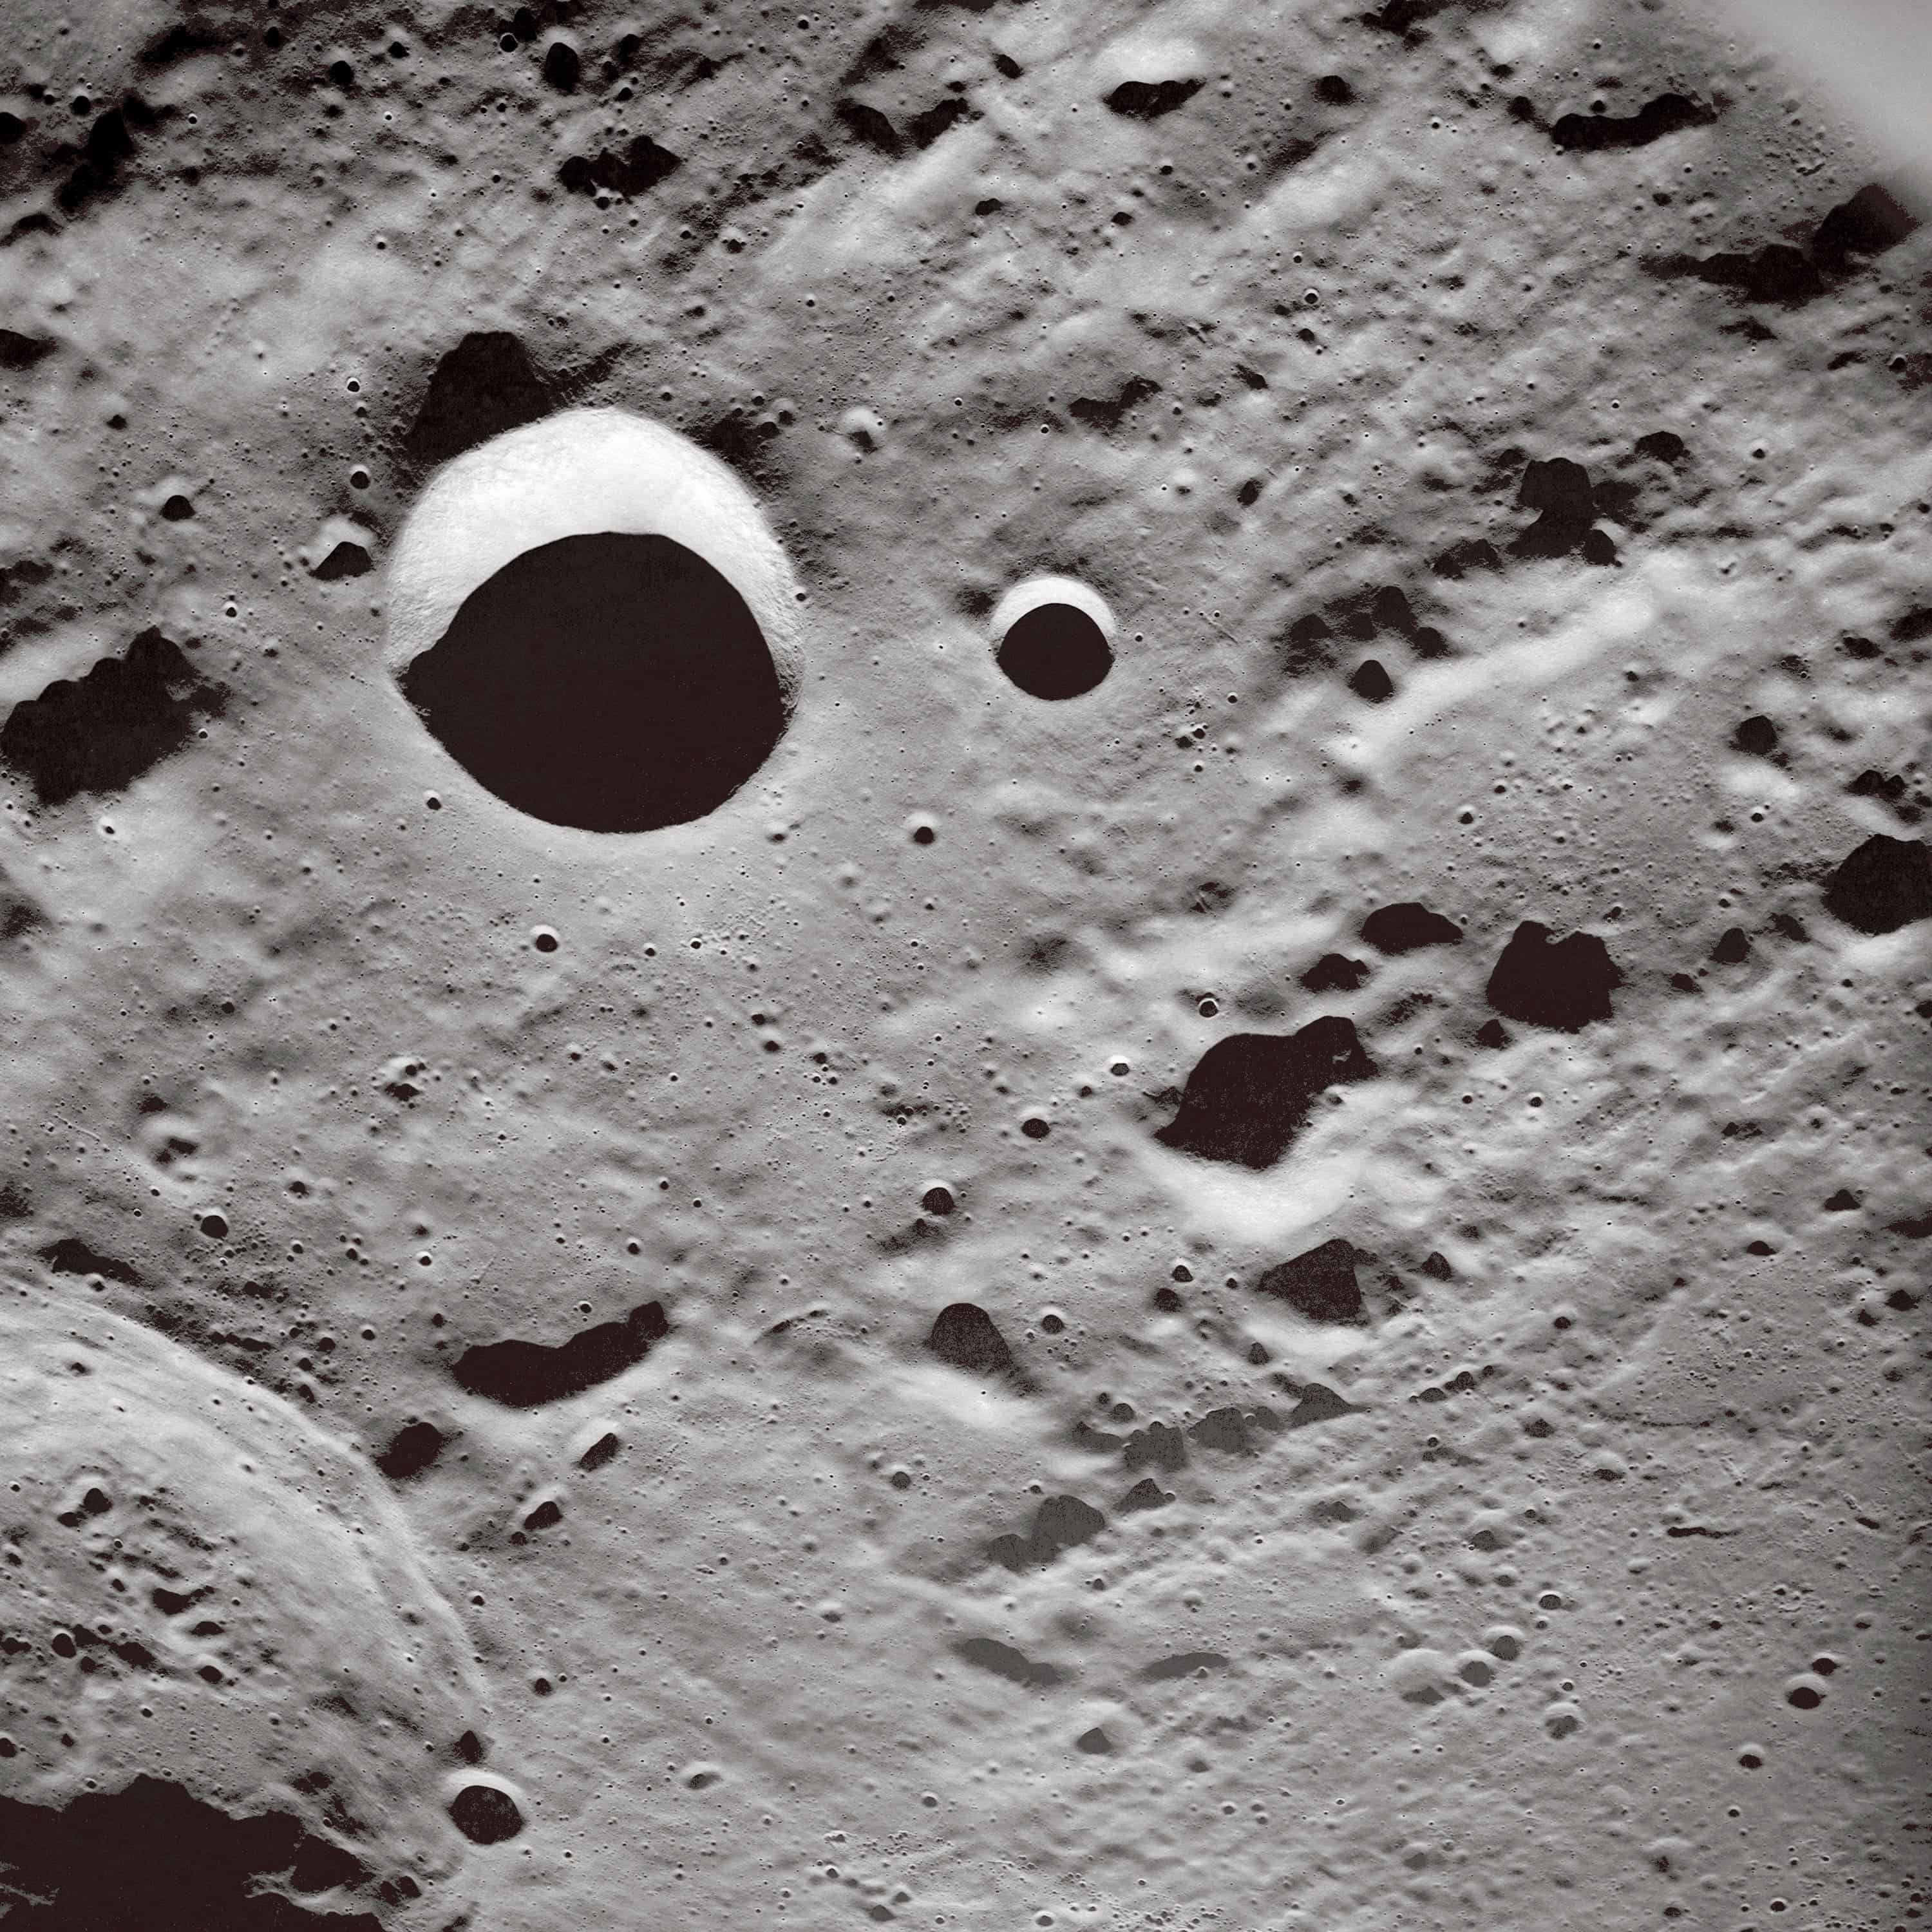 This oblique view of the Moon's surface was photographed by the Apollo 10 astronauts in May of 1969.